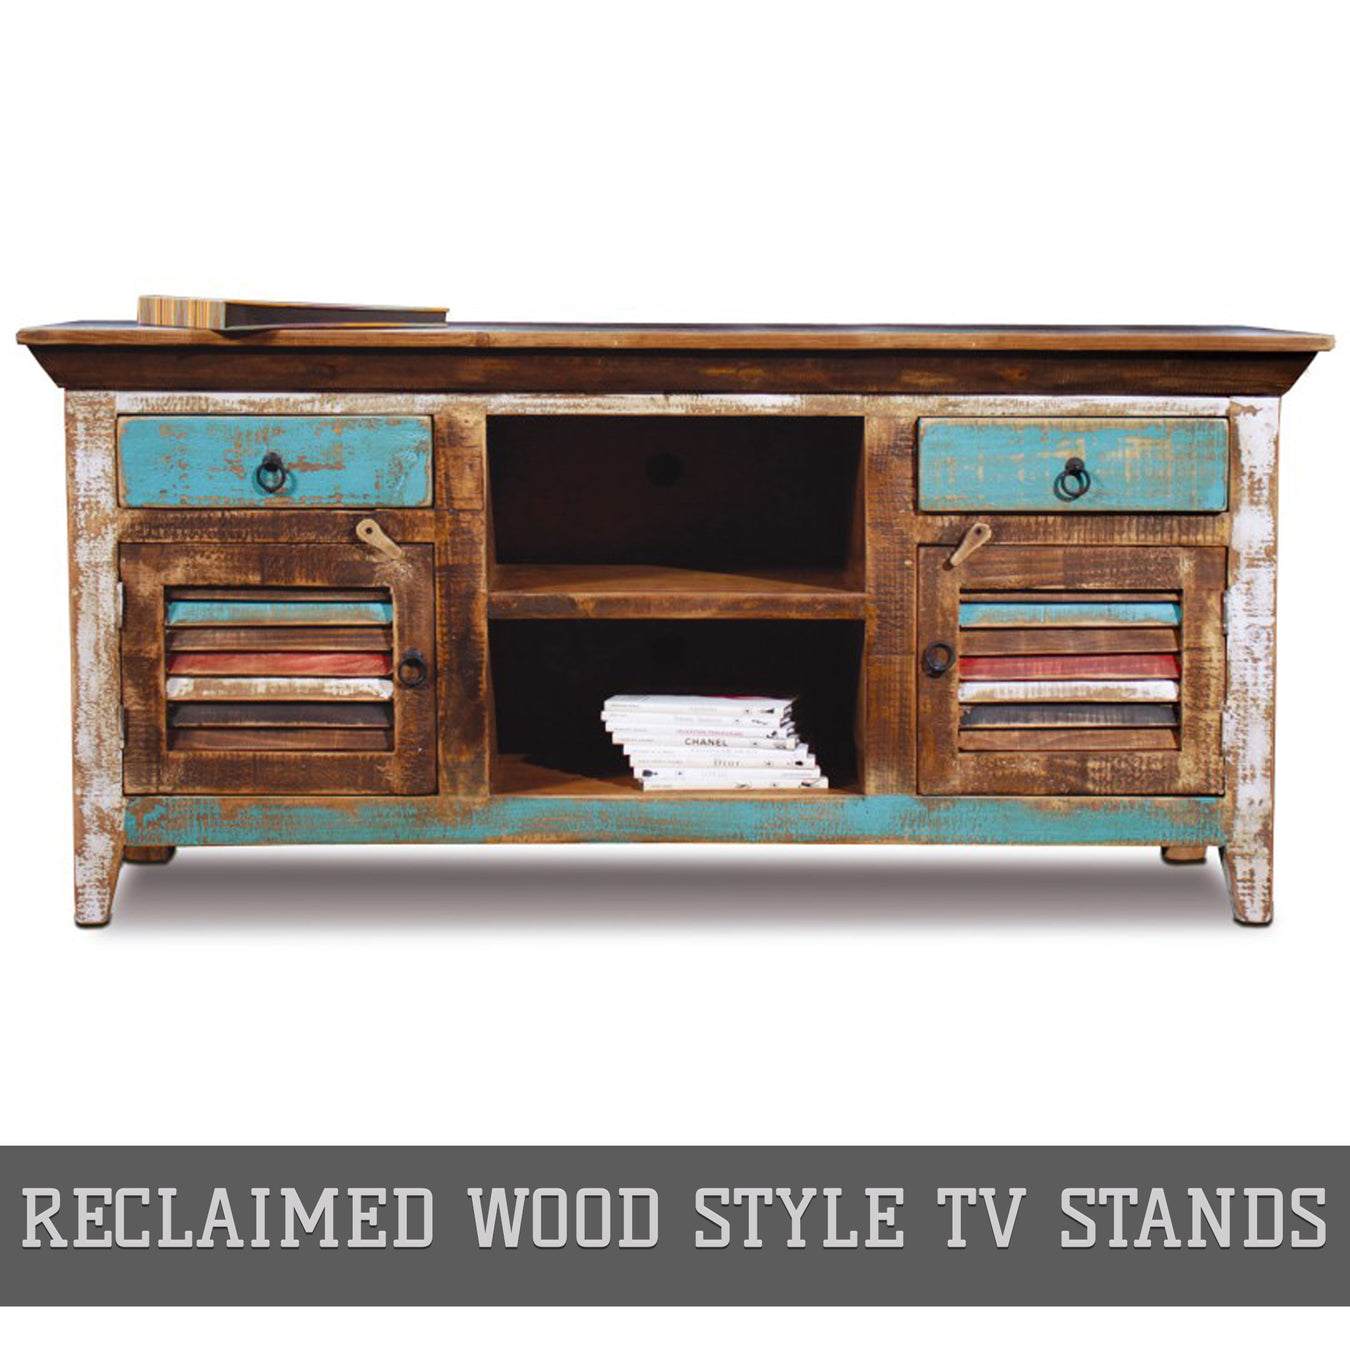 Reclaimed Wood Style TV Stands